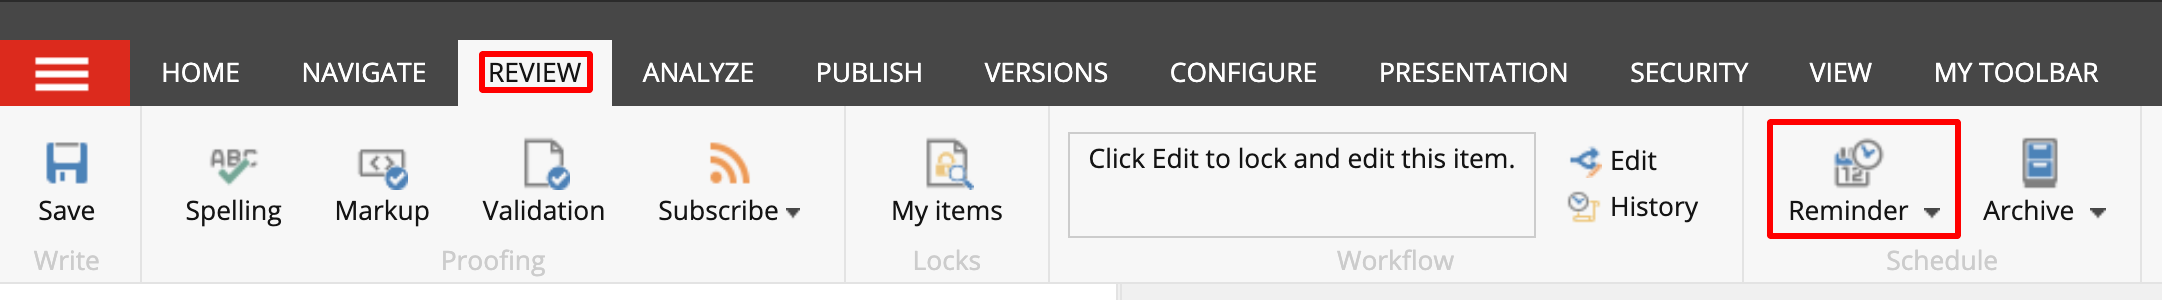 Review and reminder buttons in Sitecore navigation ribbon